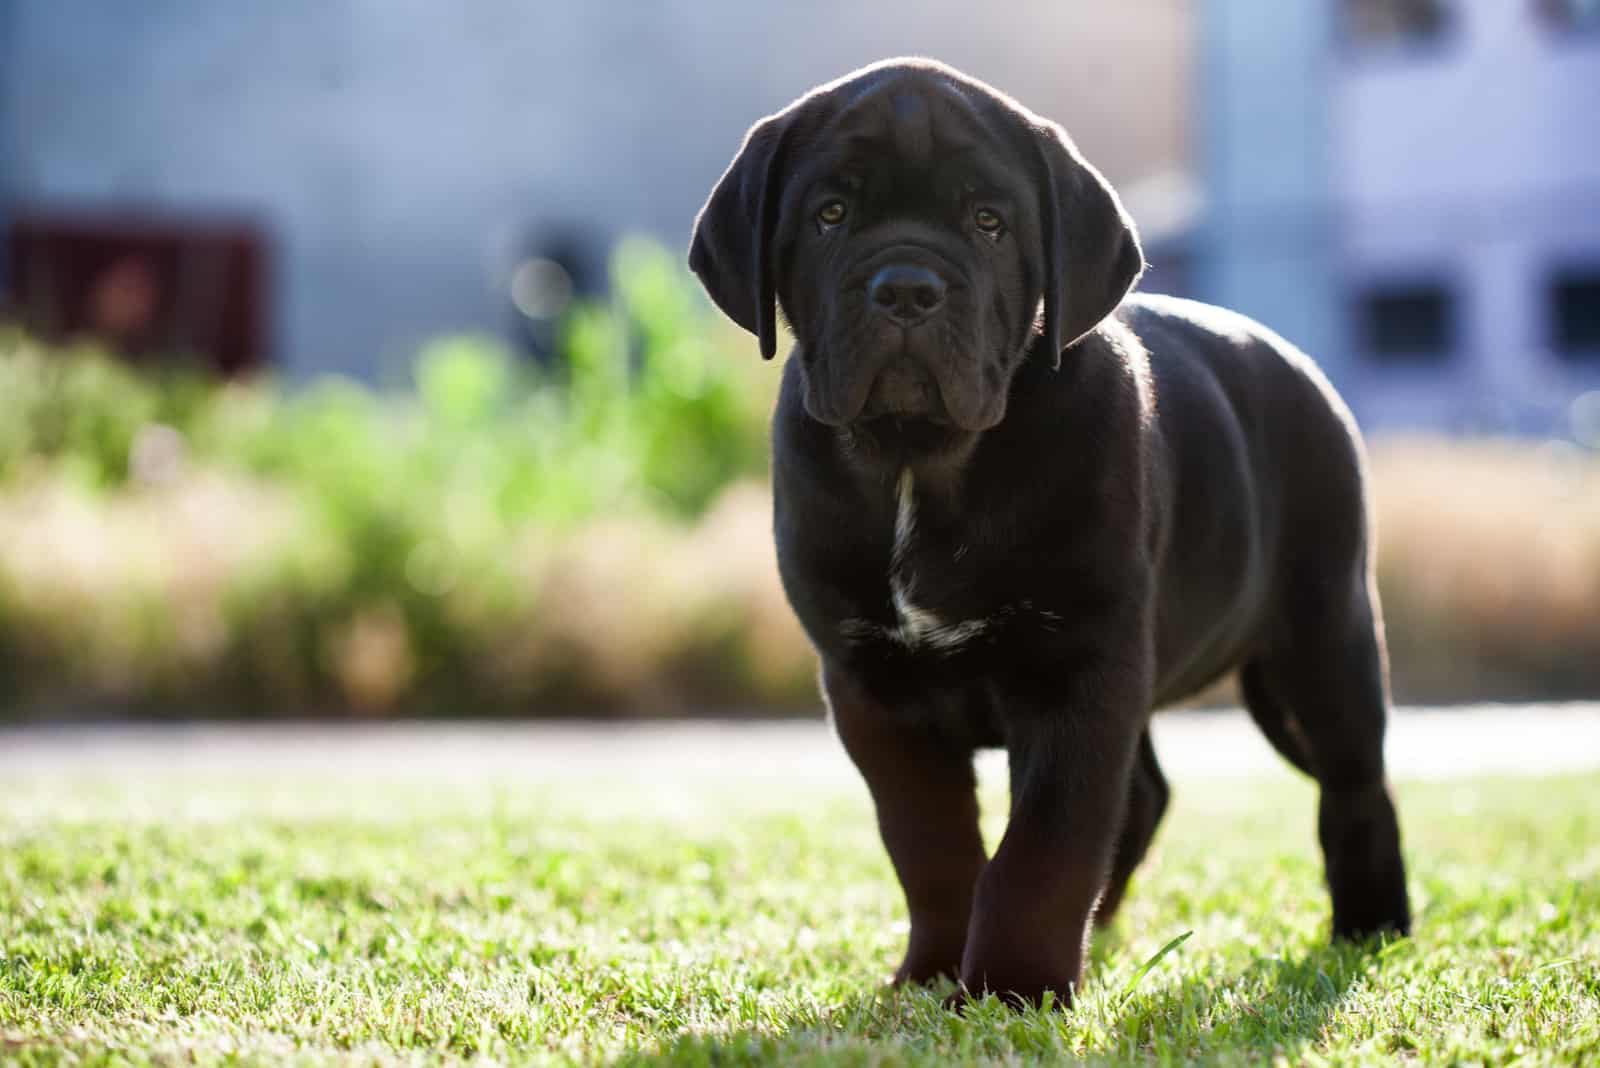 cane corso puppy standing on the grass outdoor